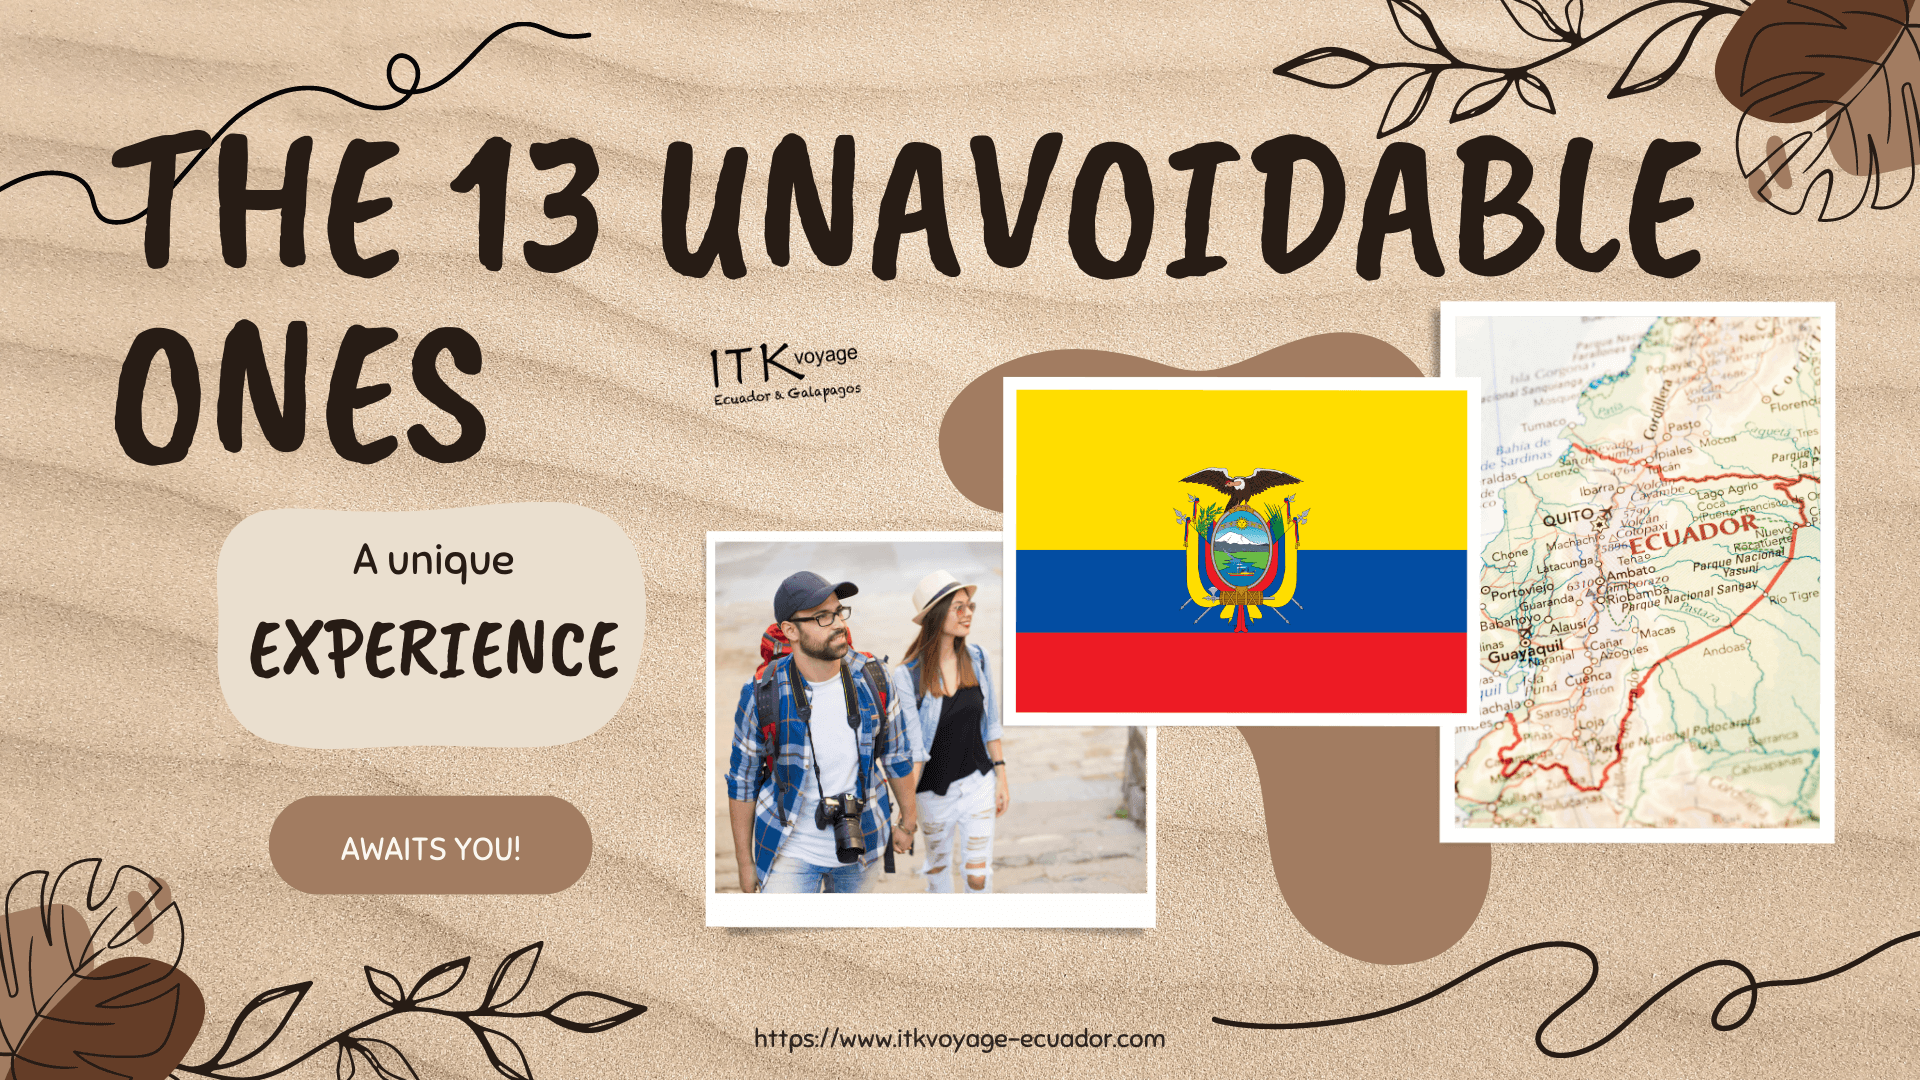 The 13 unavoidable questions before going to Ecuador